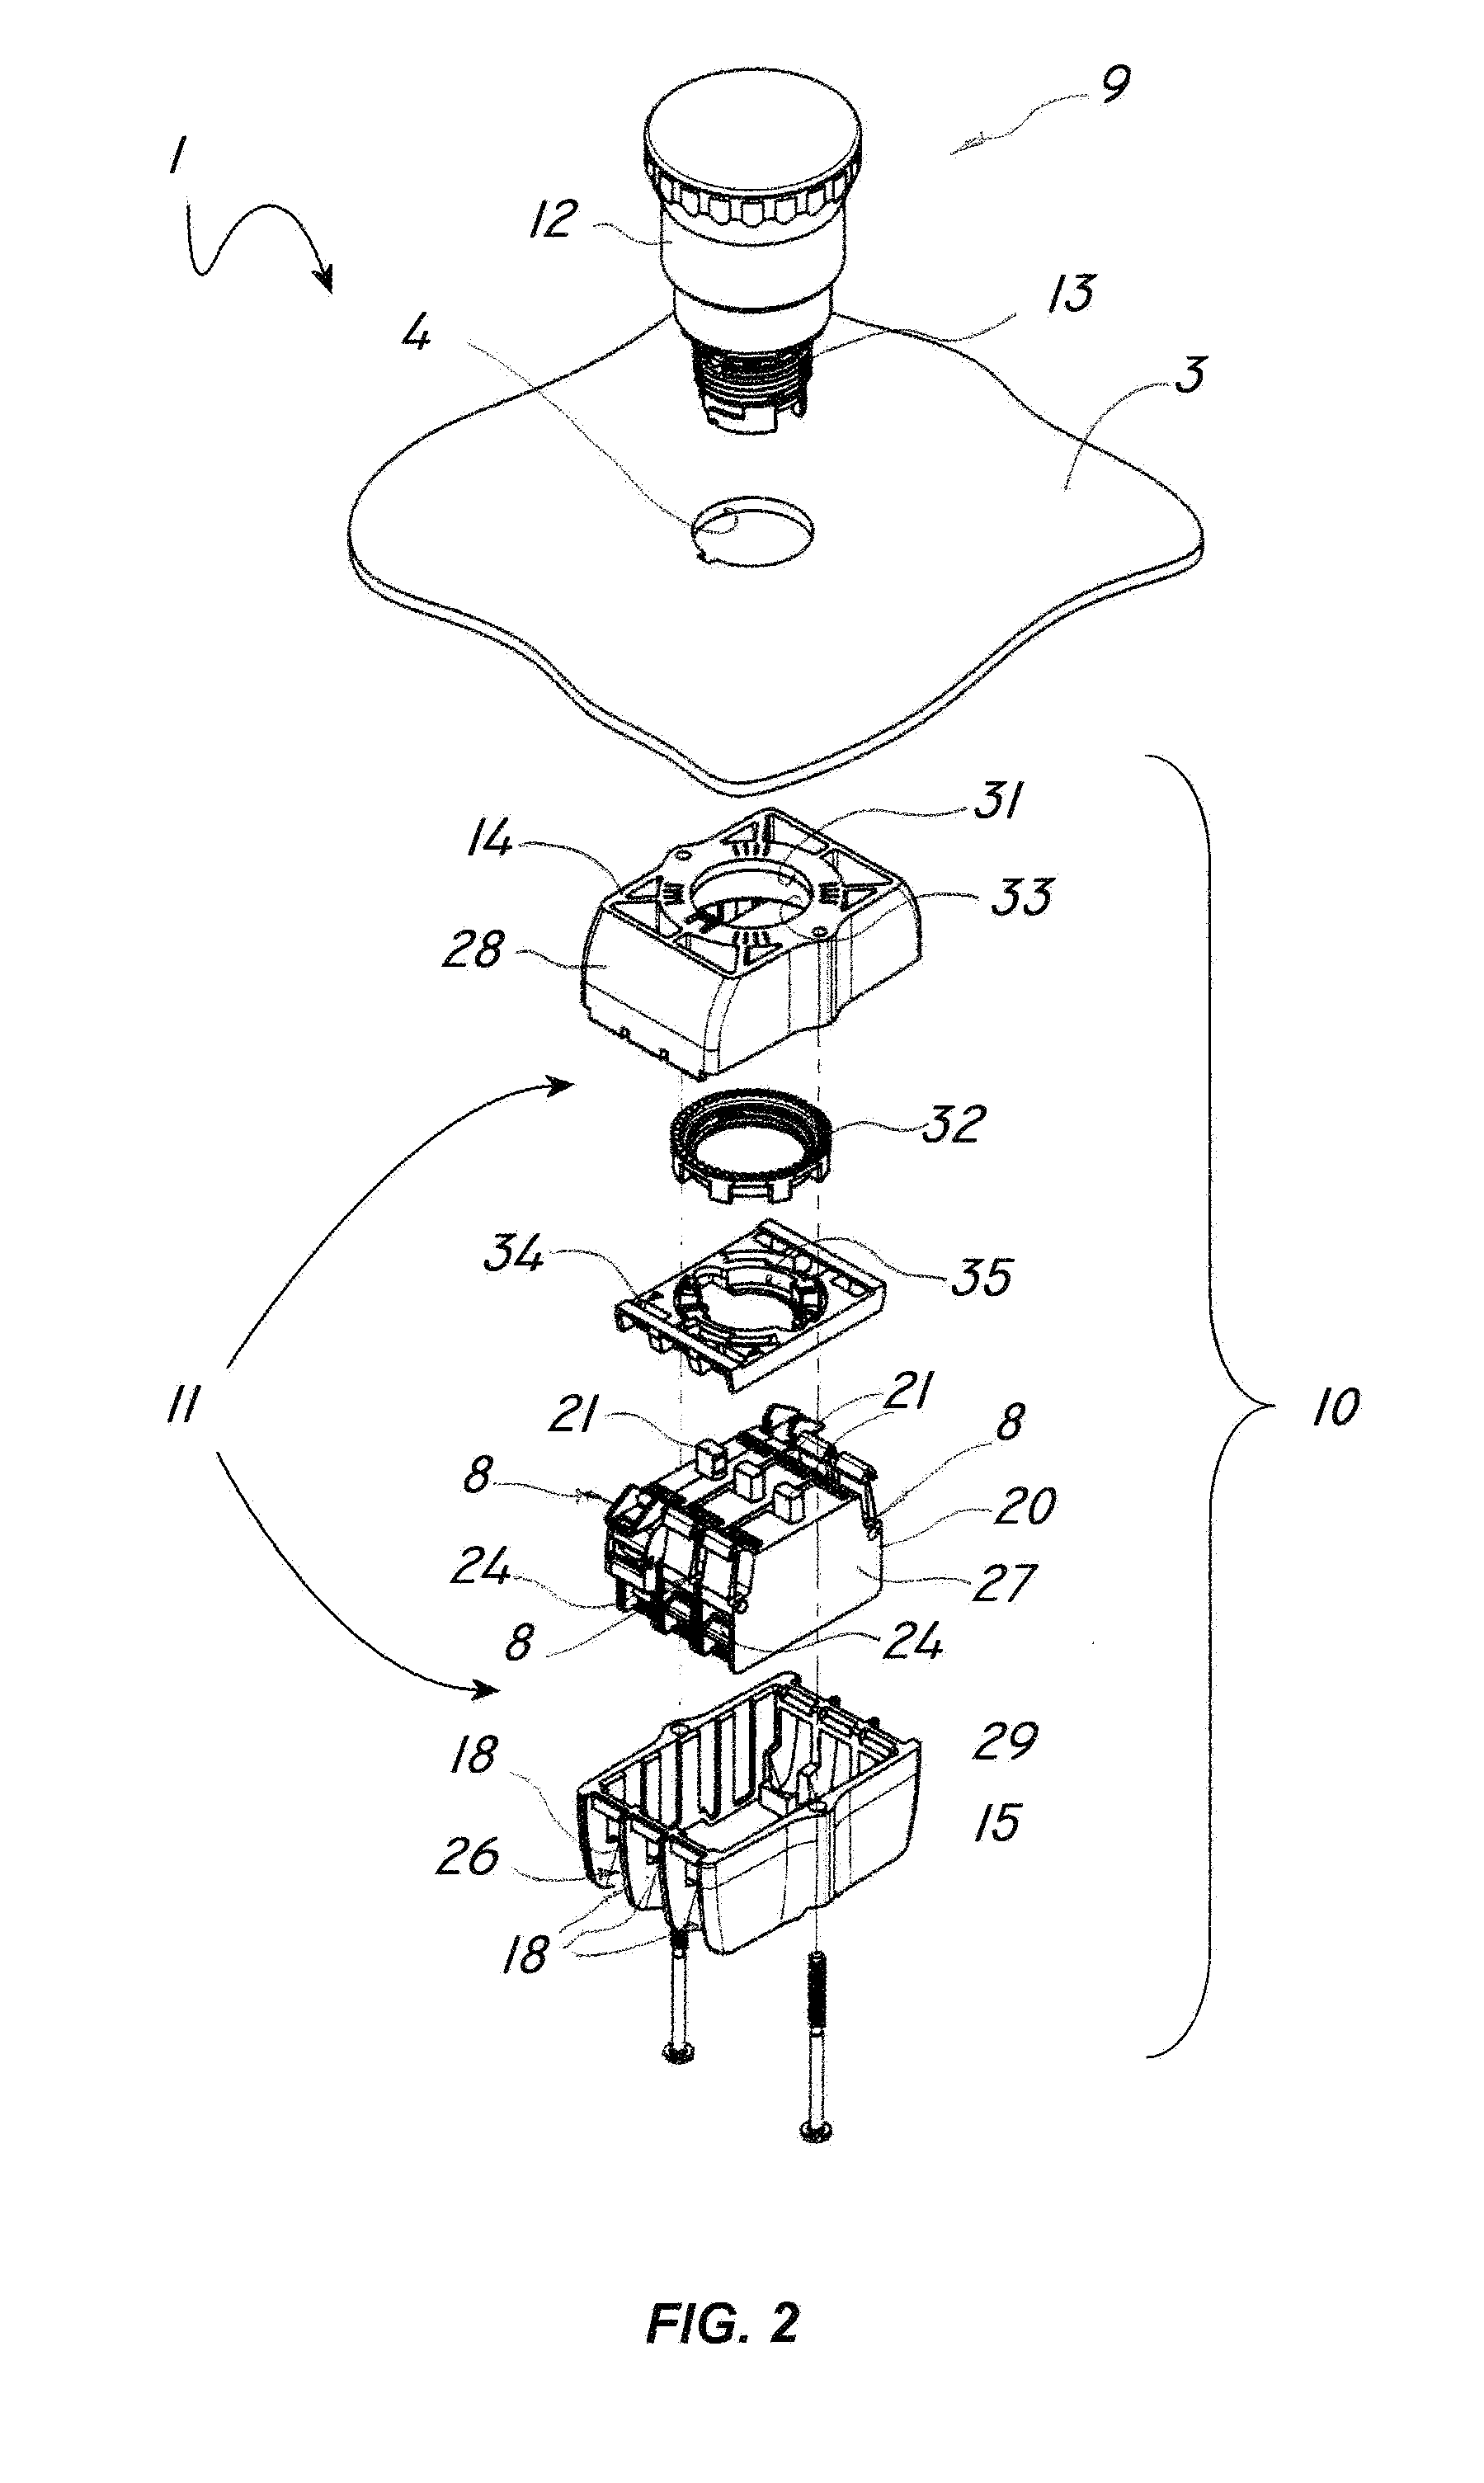 Switch control apparatus for electric plant